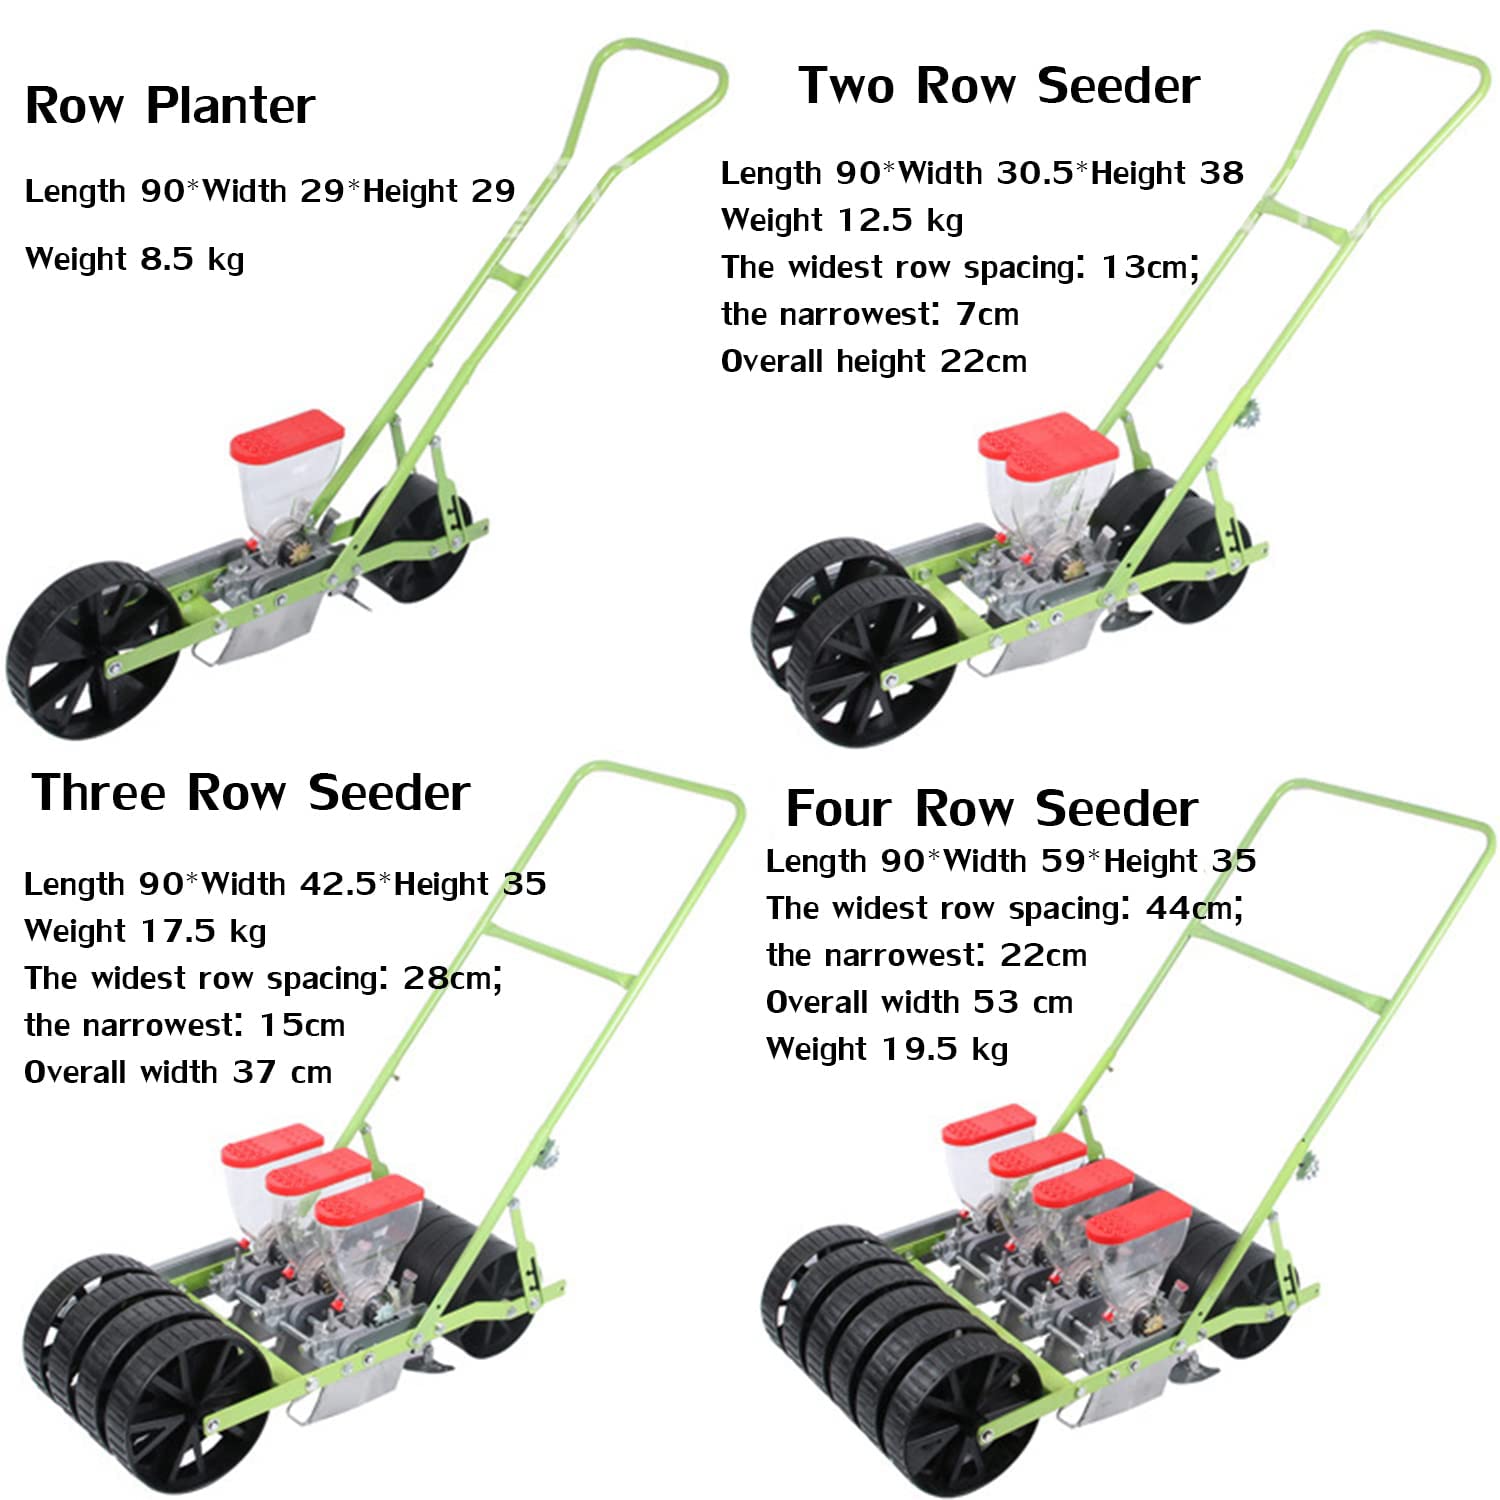 Hand Push Garden Seeder, Manual Farmer Pushes Vegetable Planter Precision Seeder, Peanut Corn Bean Planter, Adjustable Plant Spacing Spreader for Sowing Seeds 4-Row